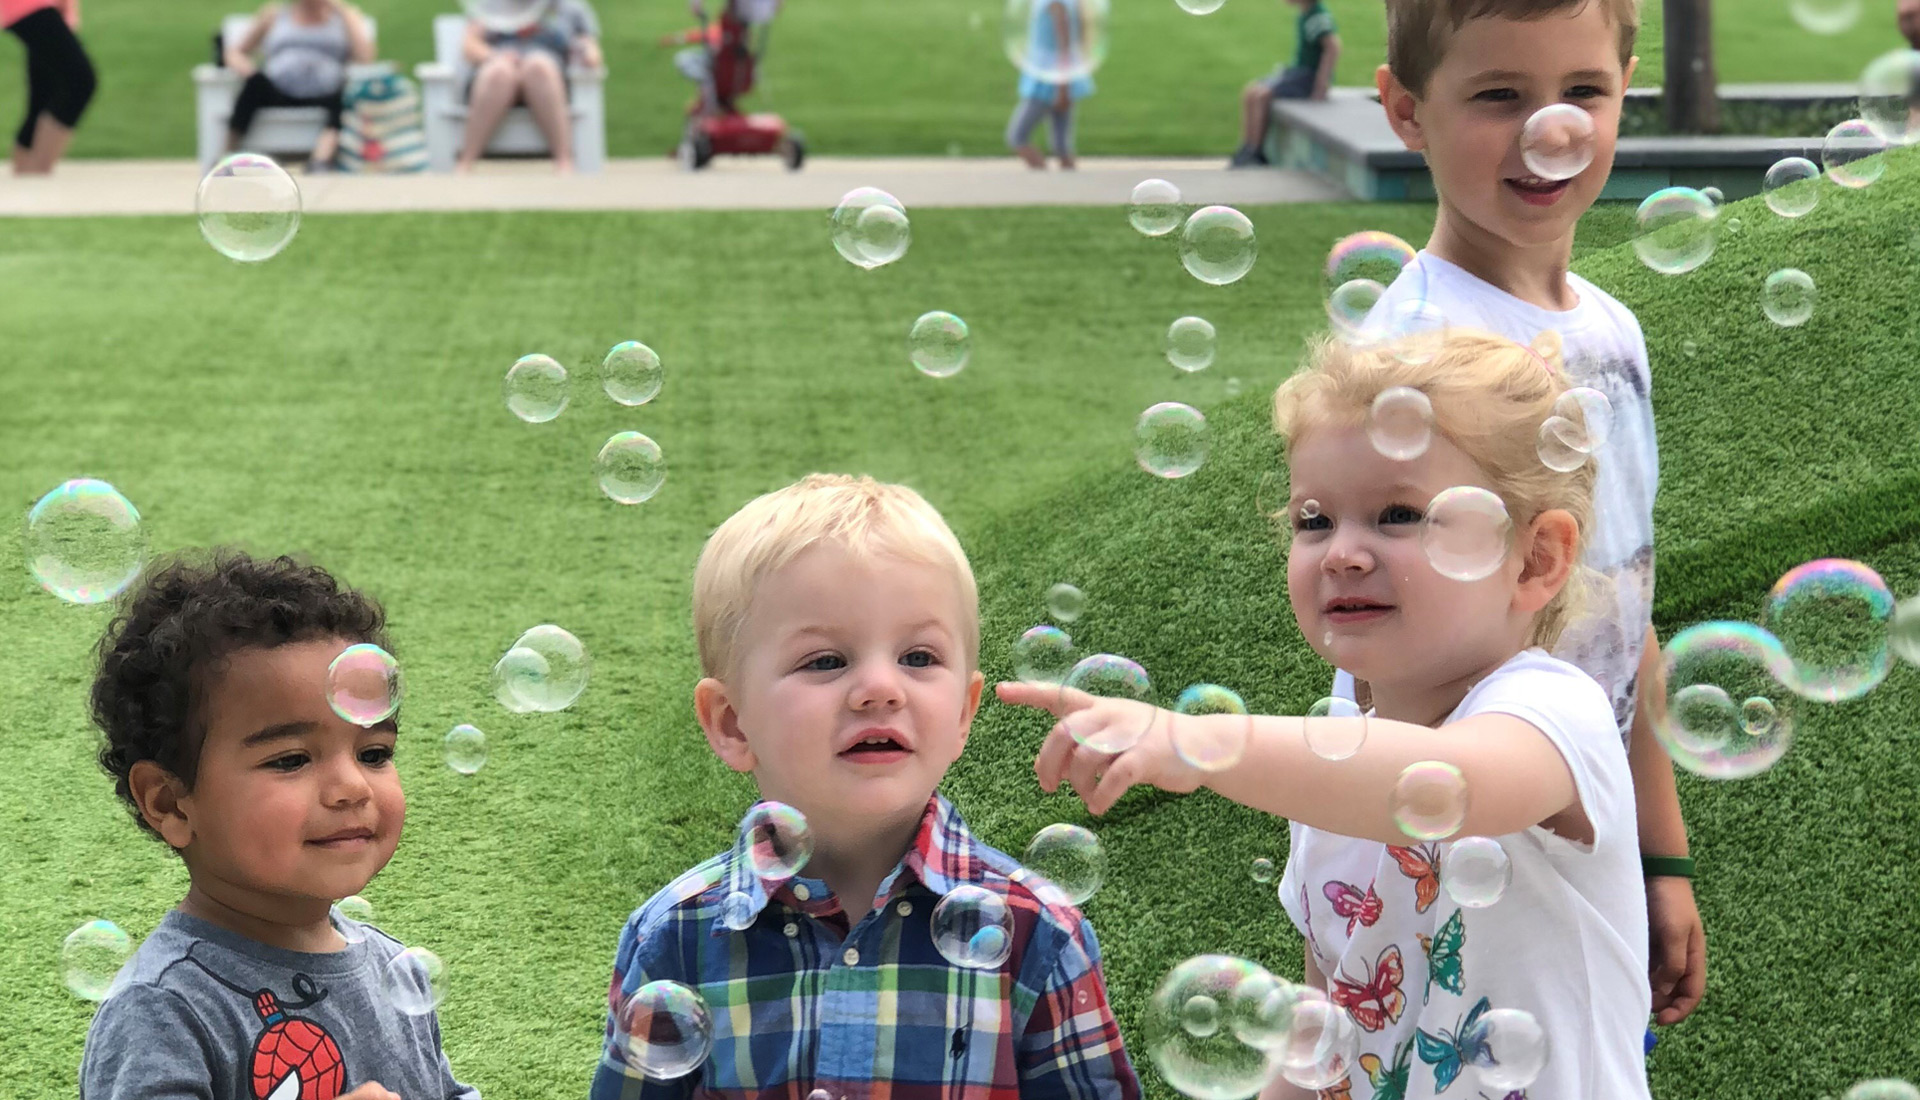 It's bubble time at Harvest!